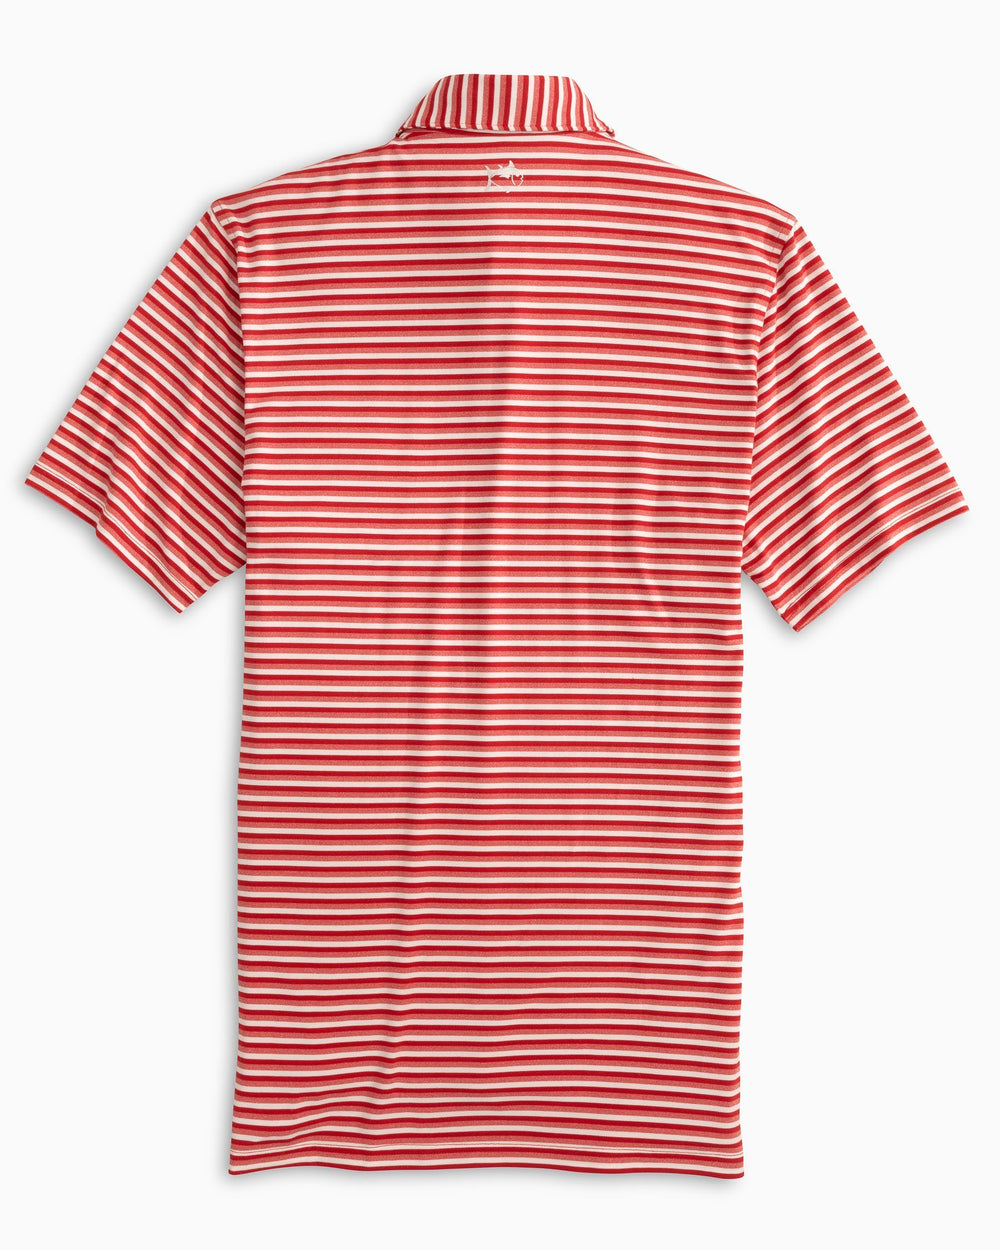 The back of the Men's Ohio State Buckeyes Heathered Striped Performance Polo Shirt - Varsity Red